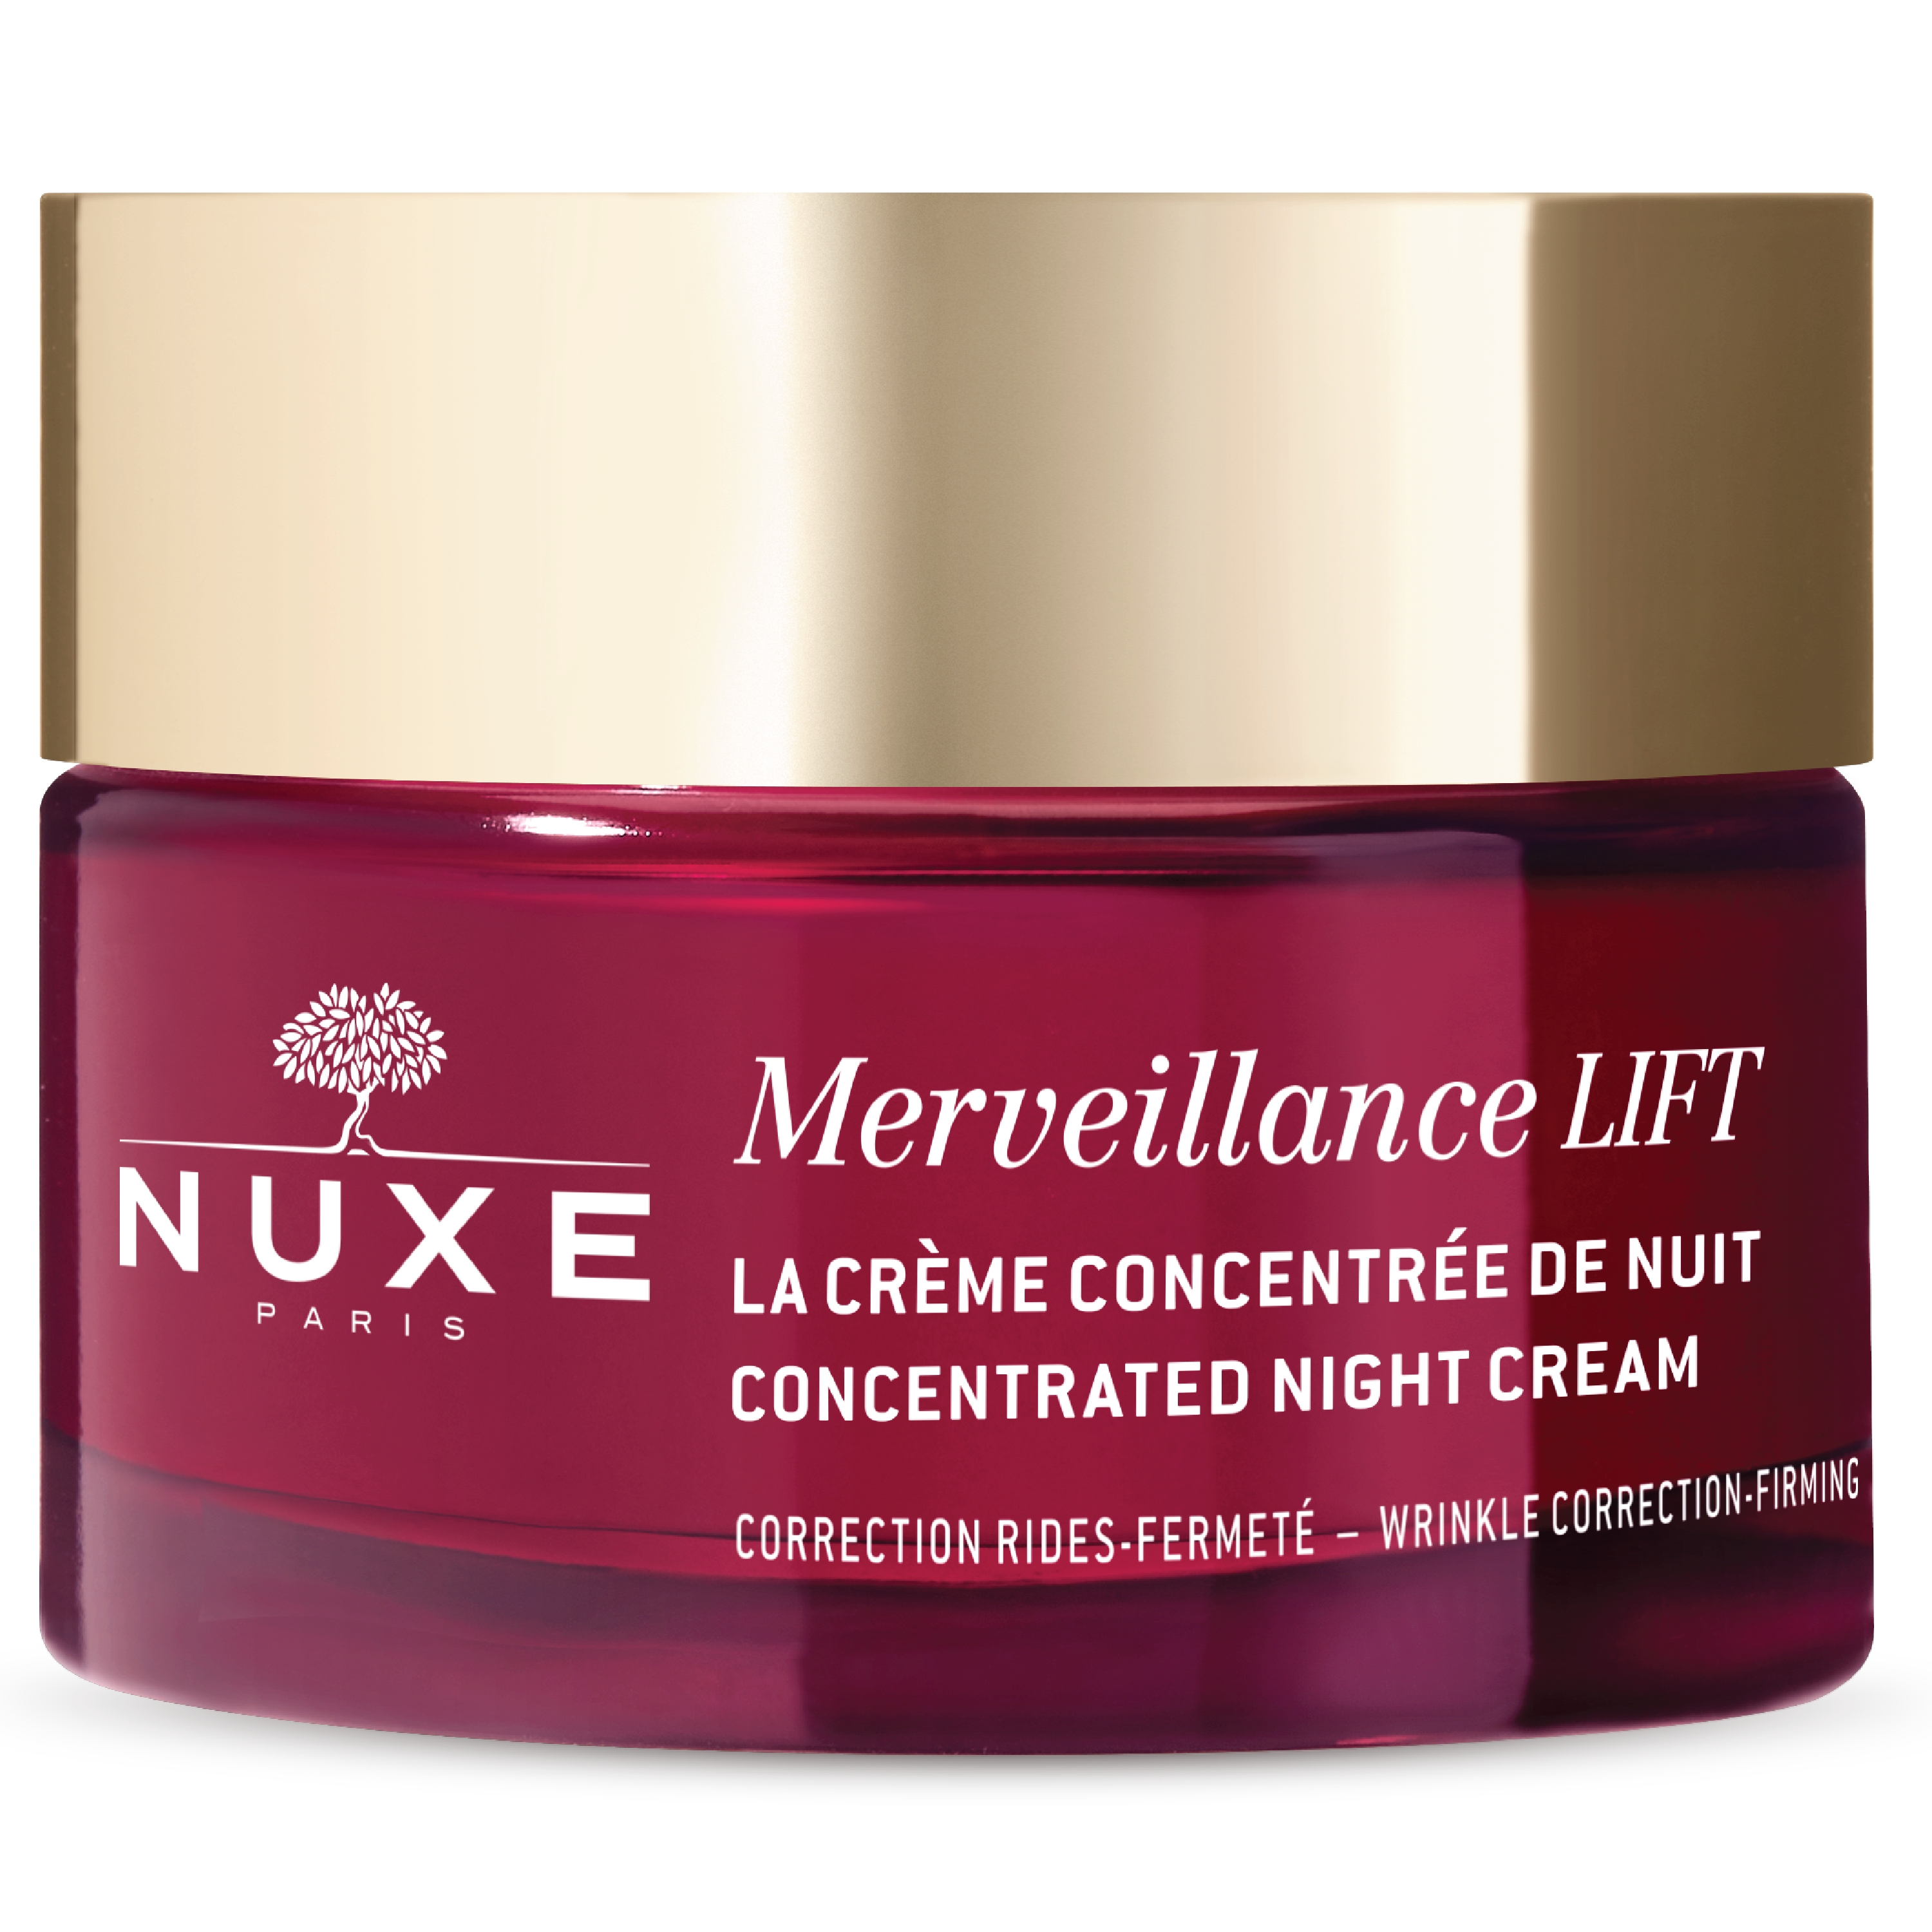 NUXE Merveillance Lift Concentrated Night Cream, 50 ml